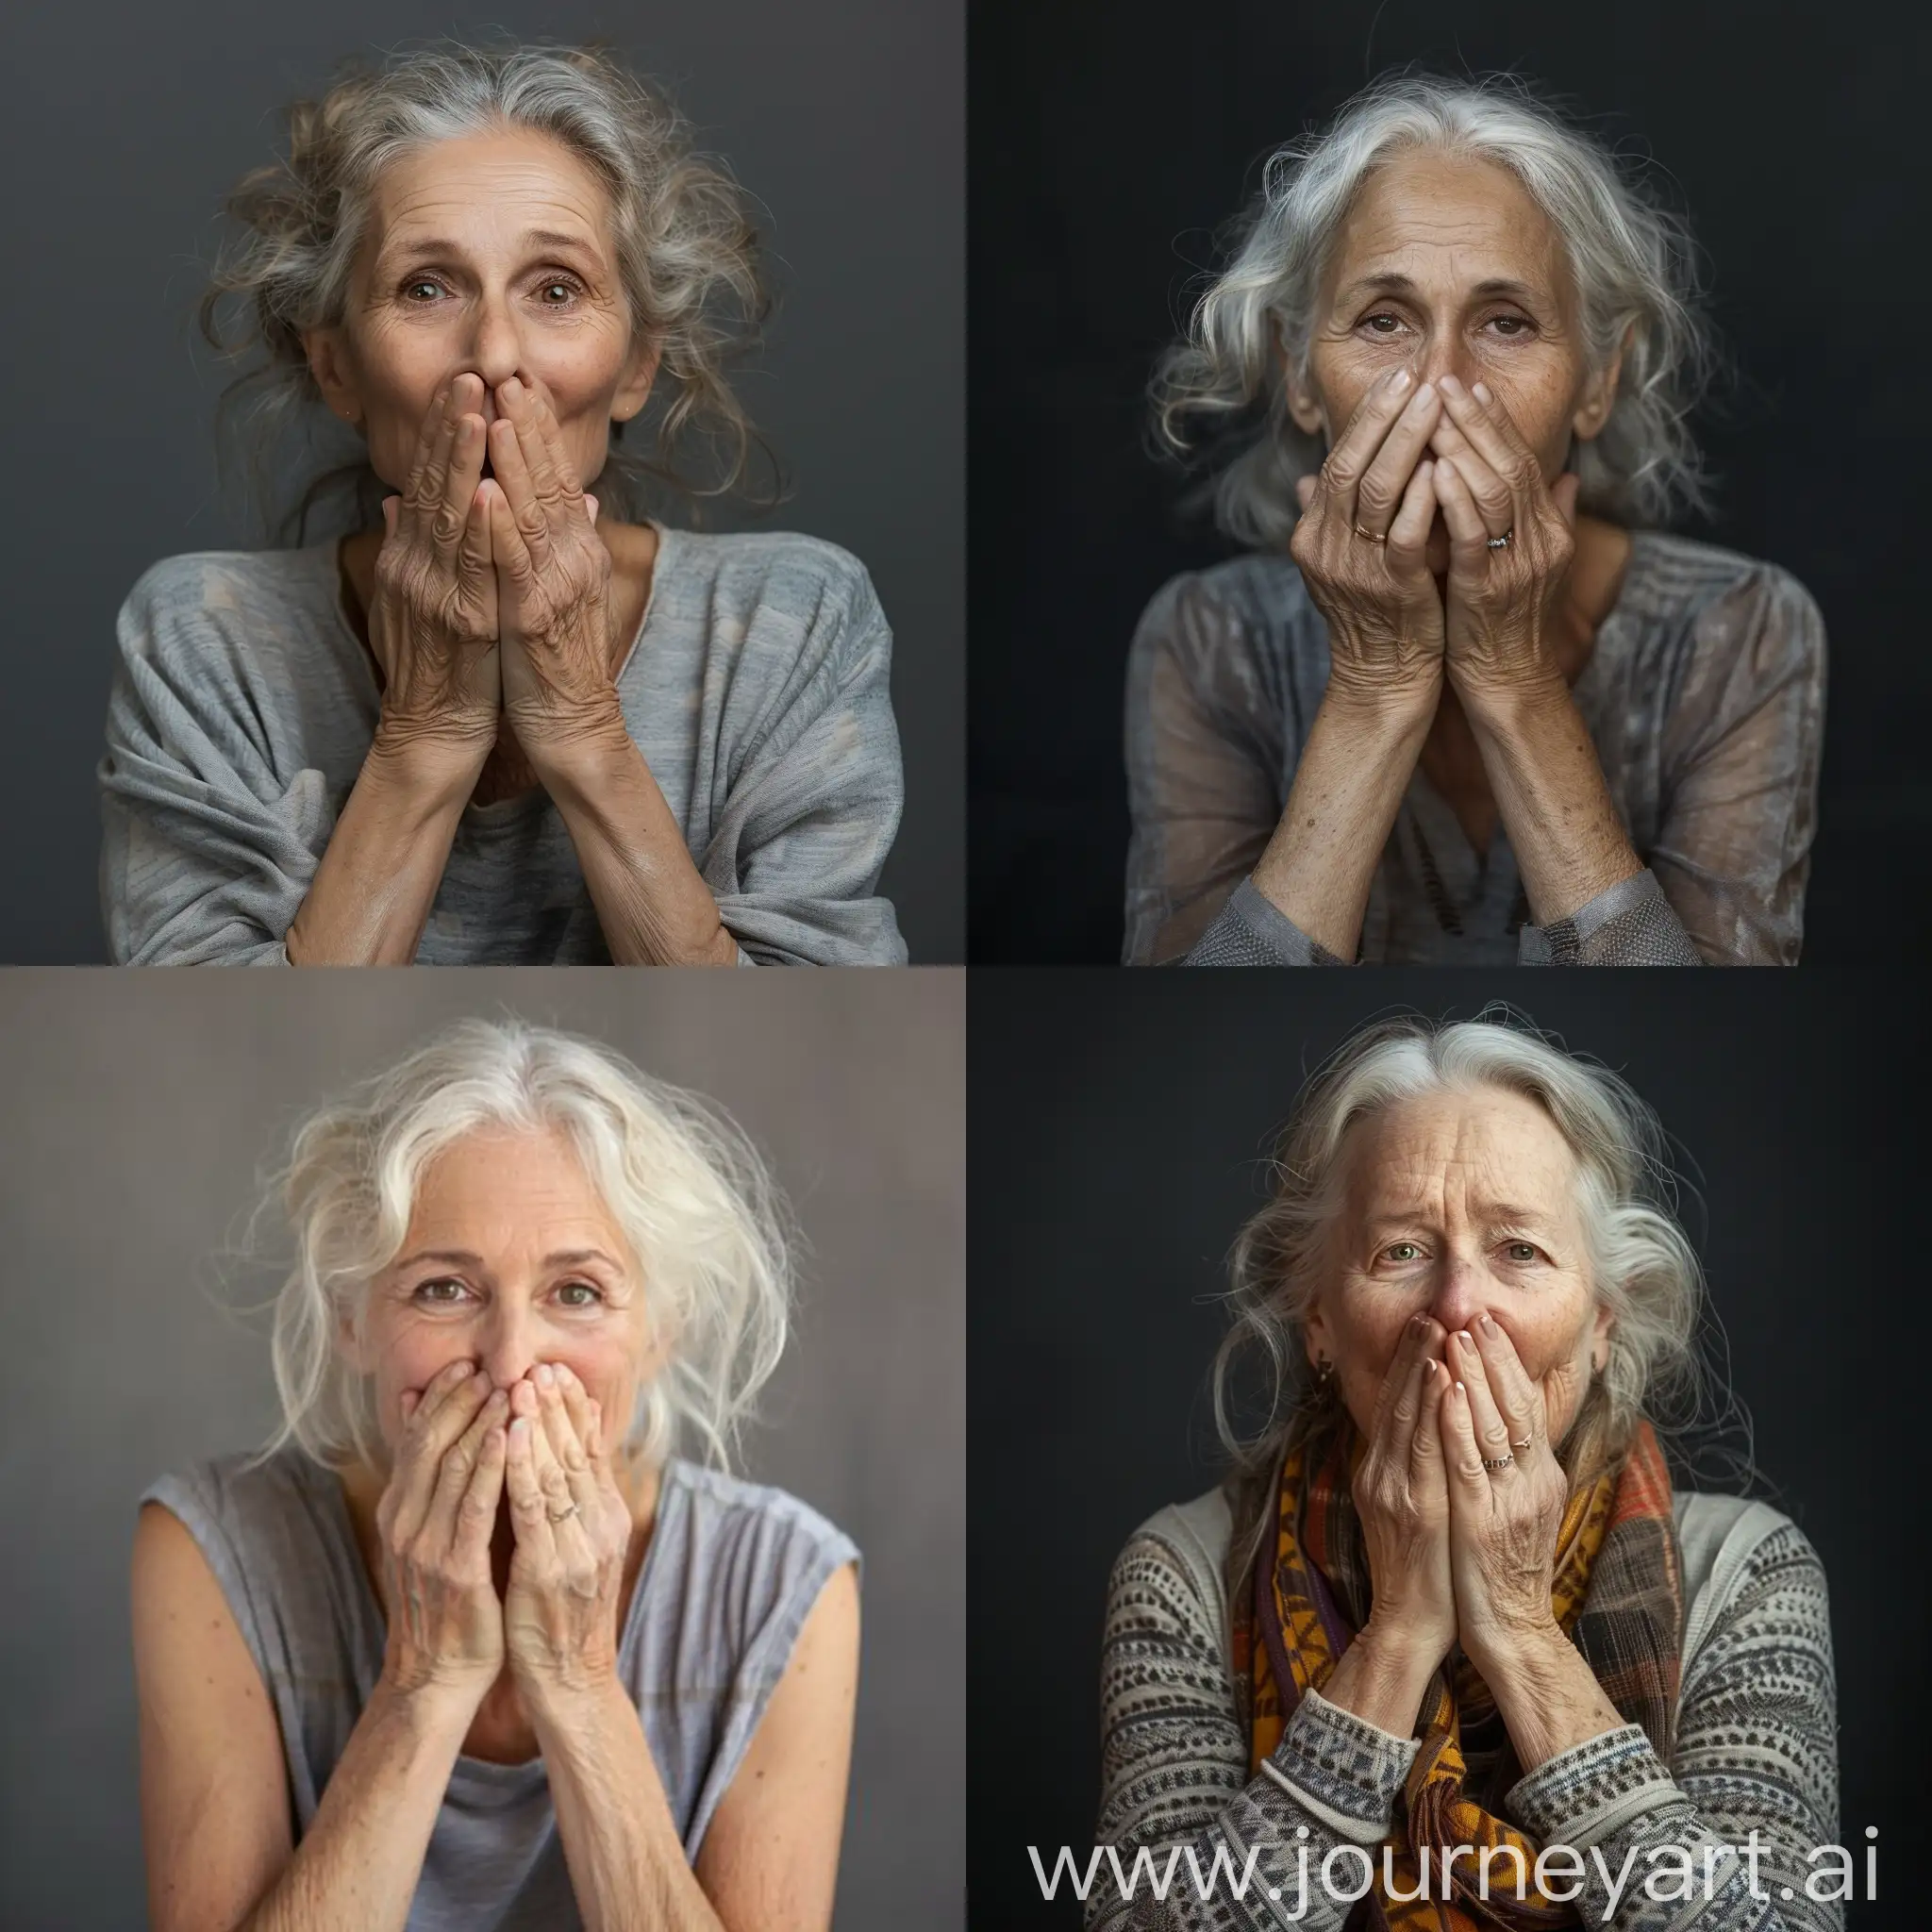 55 - 65 year-old woman covers her mouth with her hands, stock photo, magazine photo, positive photo, homogeneous background